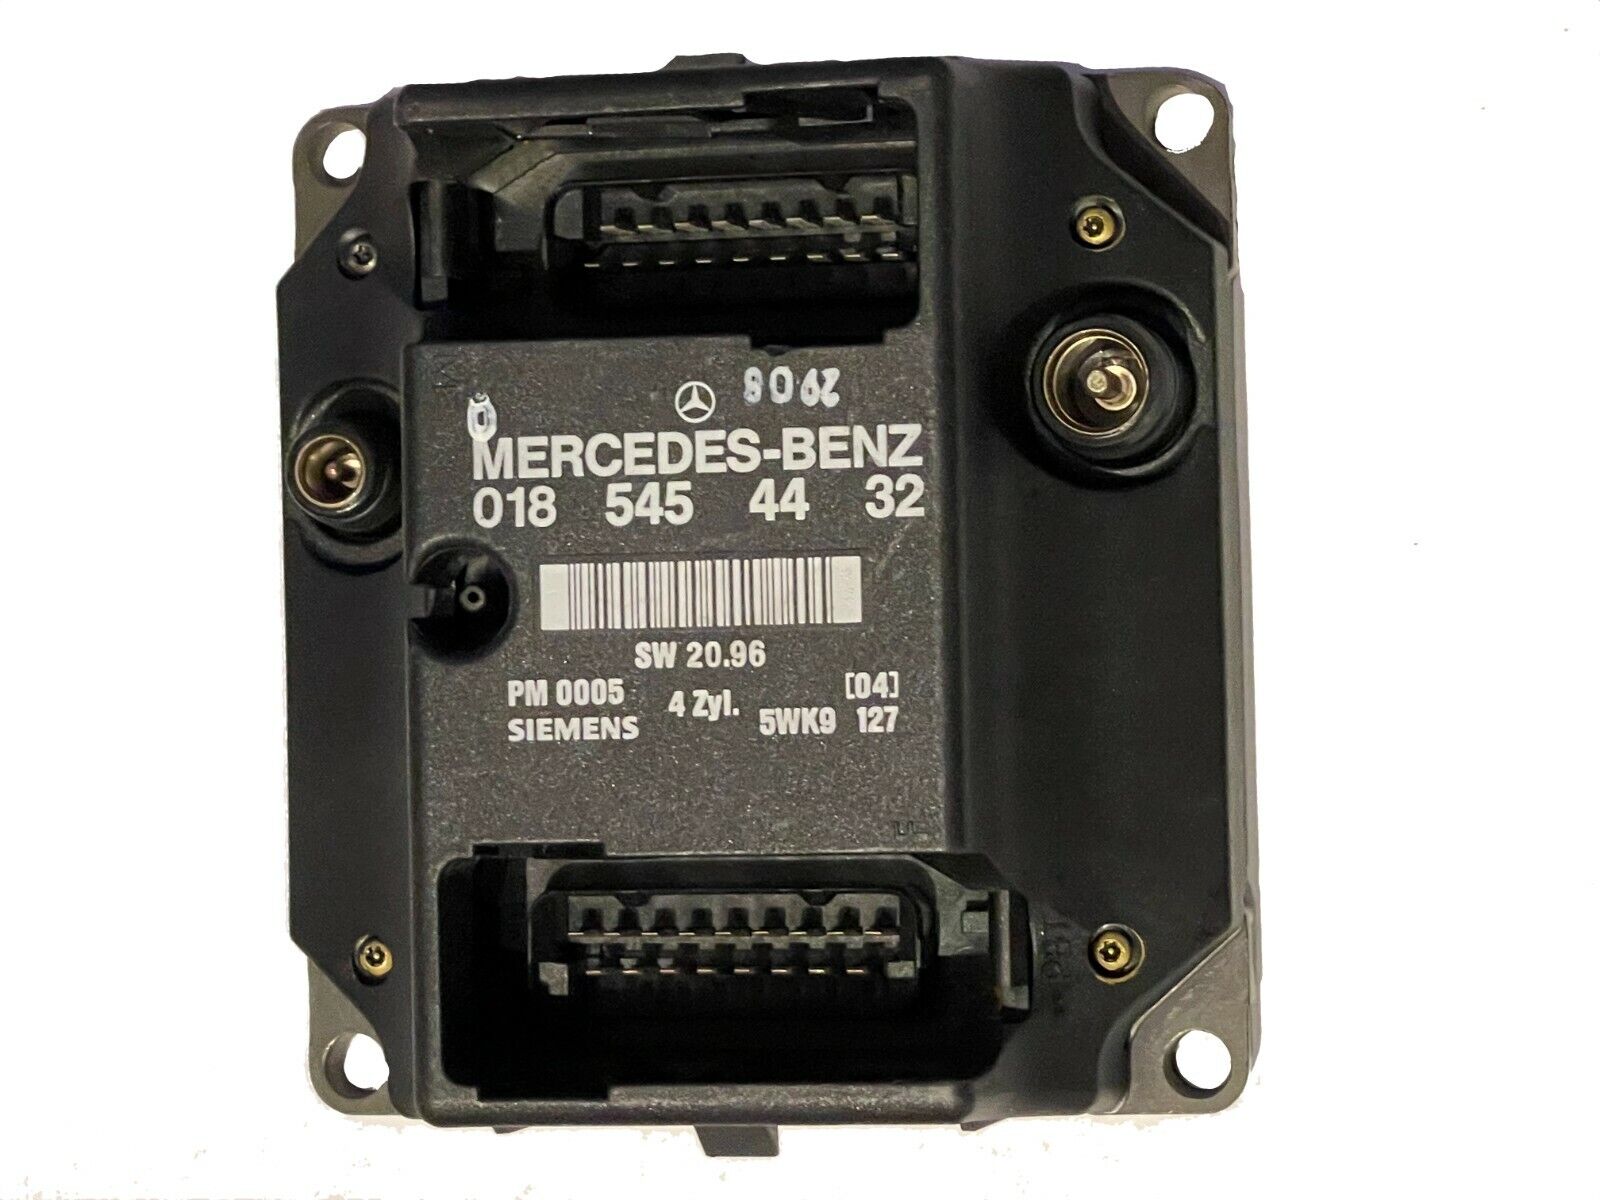 Mercedes W202 C200 C180 Ignition Controller Module PMS NEW OEM 